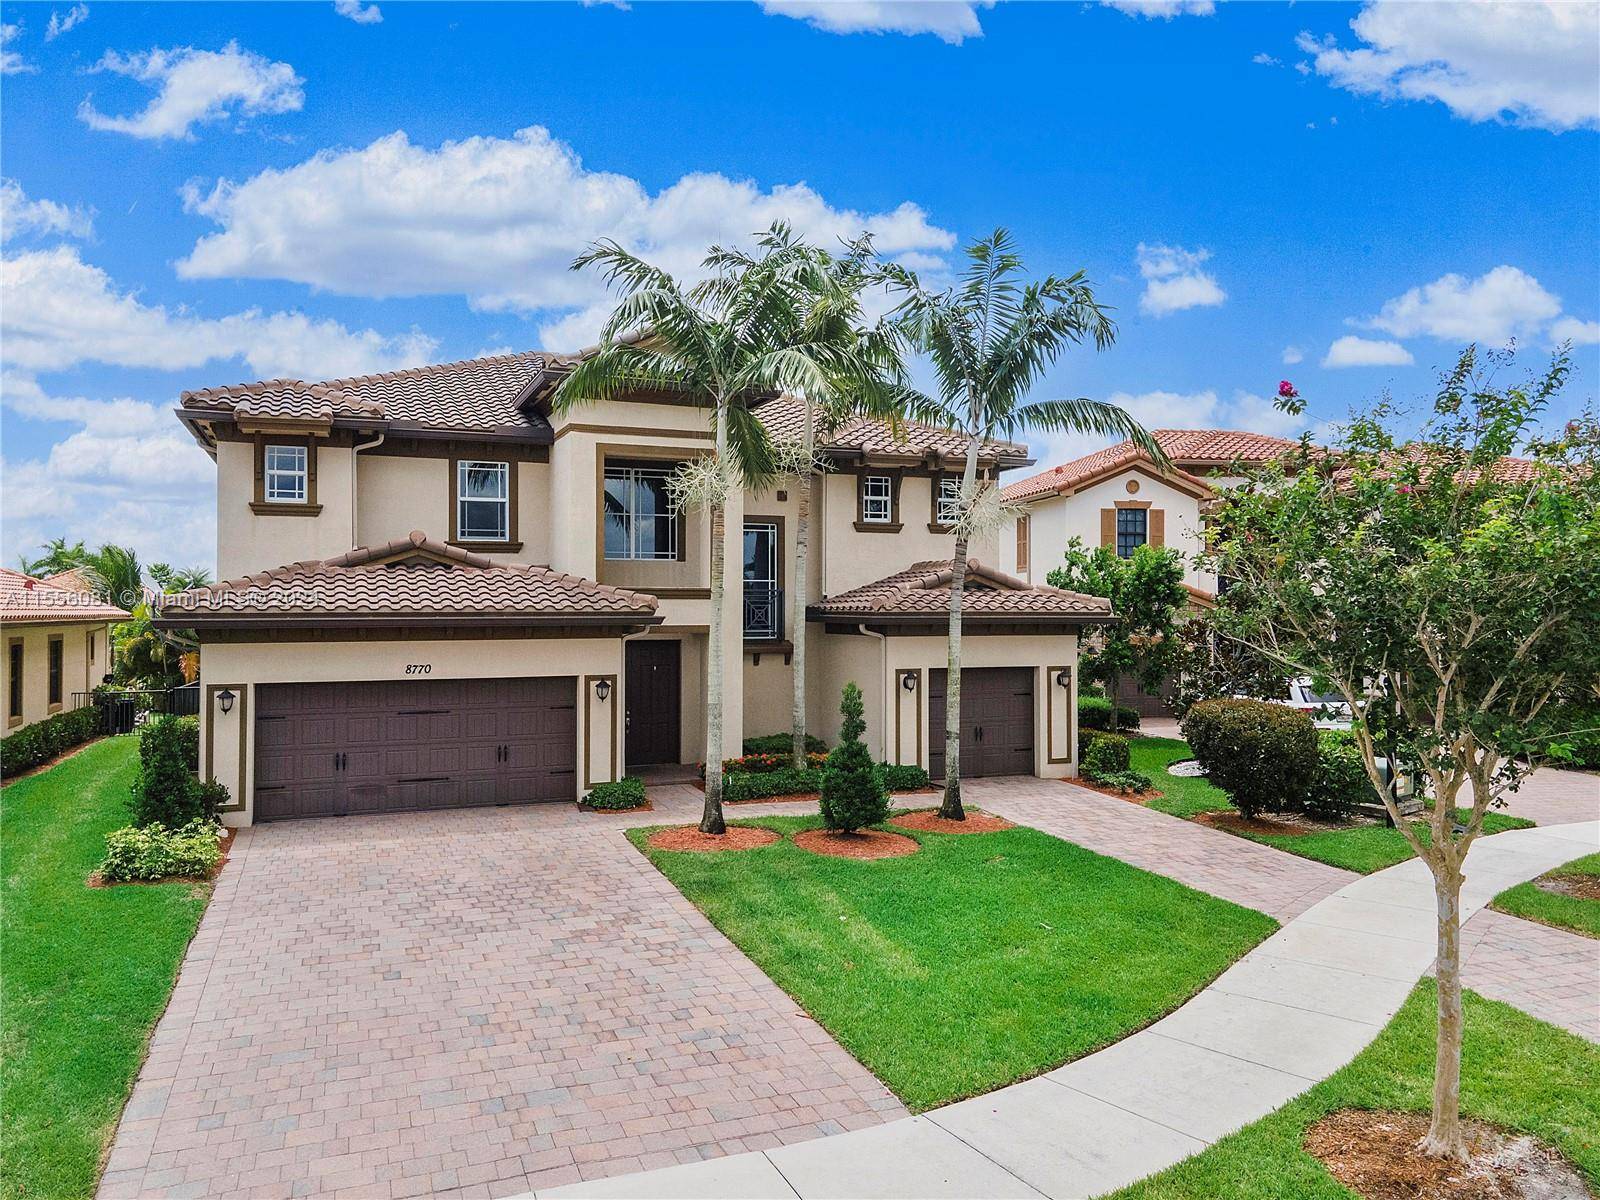 Resort style living at Parkland s prestigious gated manned community of Miralago.